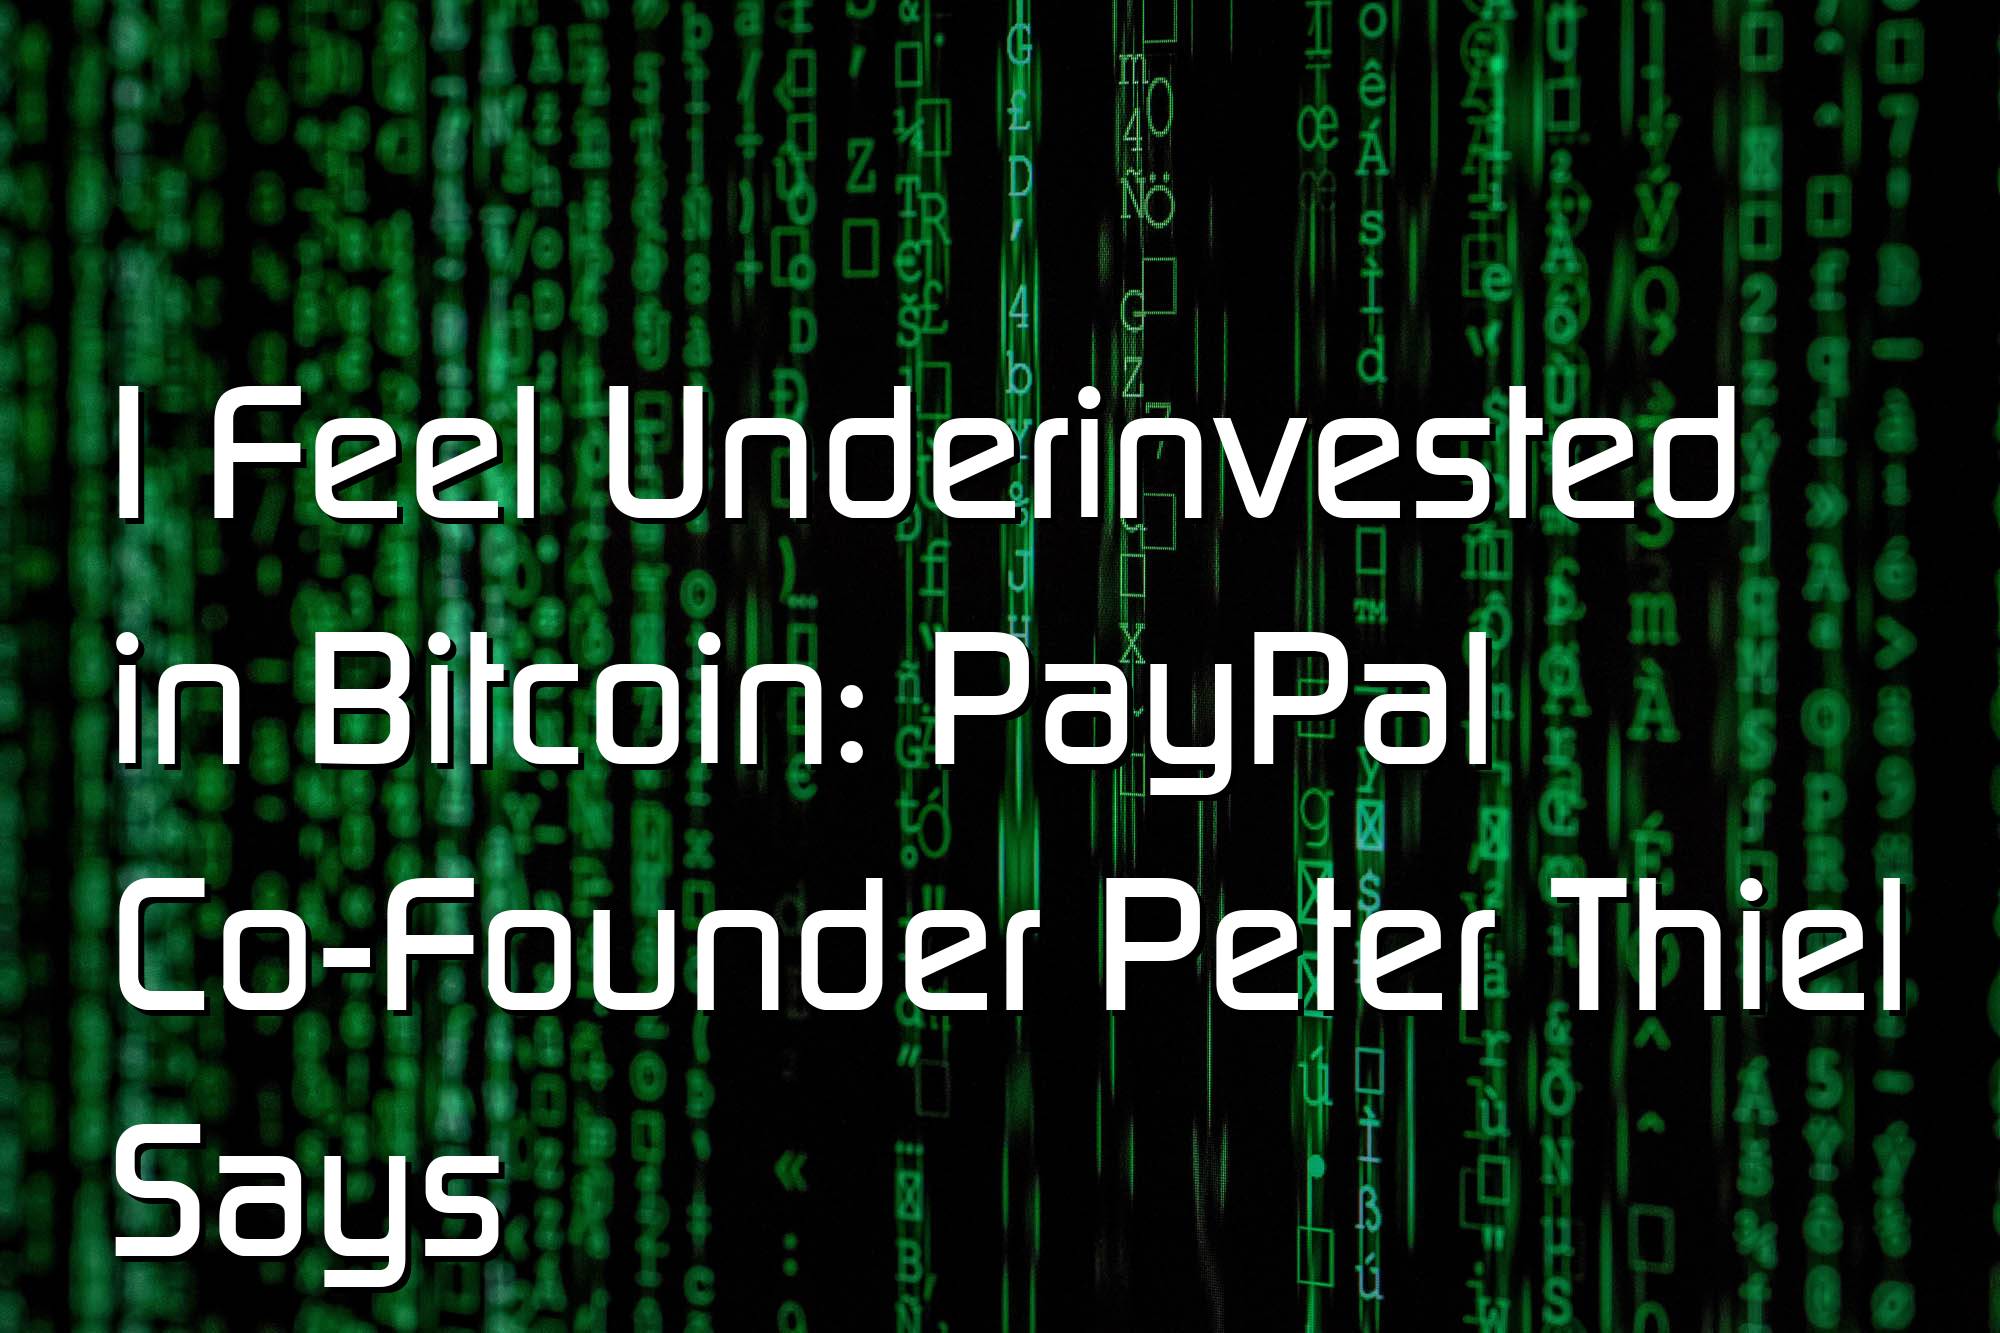 @$63205.99 I Feel Underinvested in Bitcoin: PayPal Co-Founder Peter Thiel Says